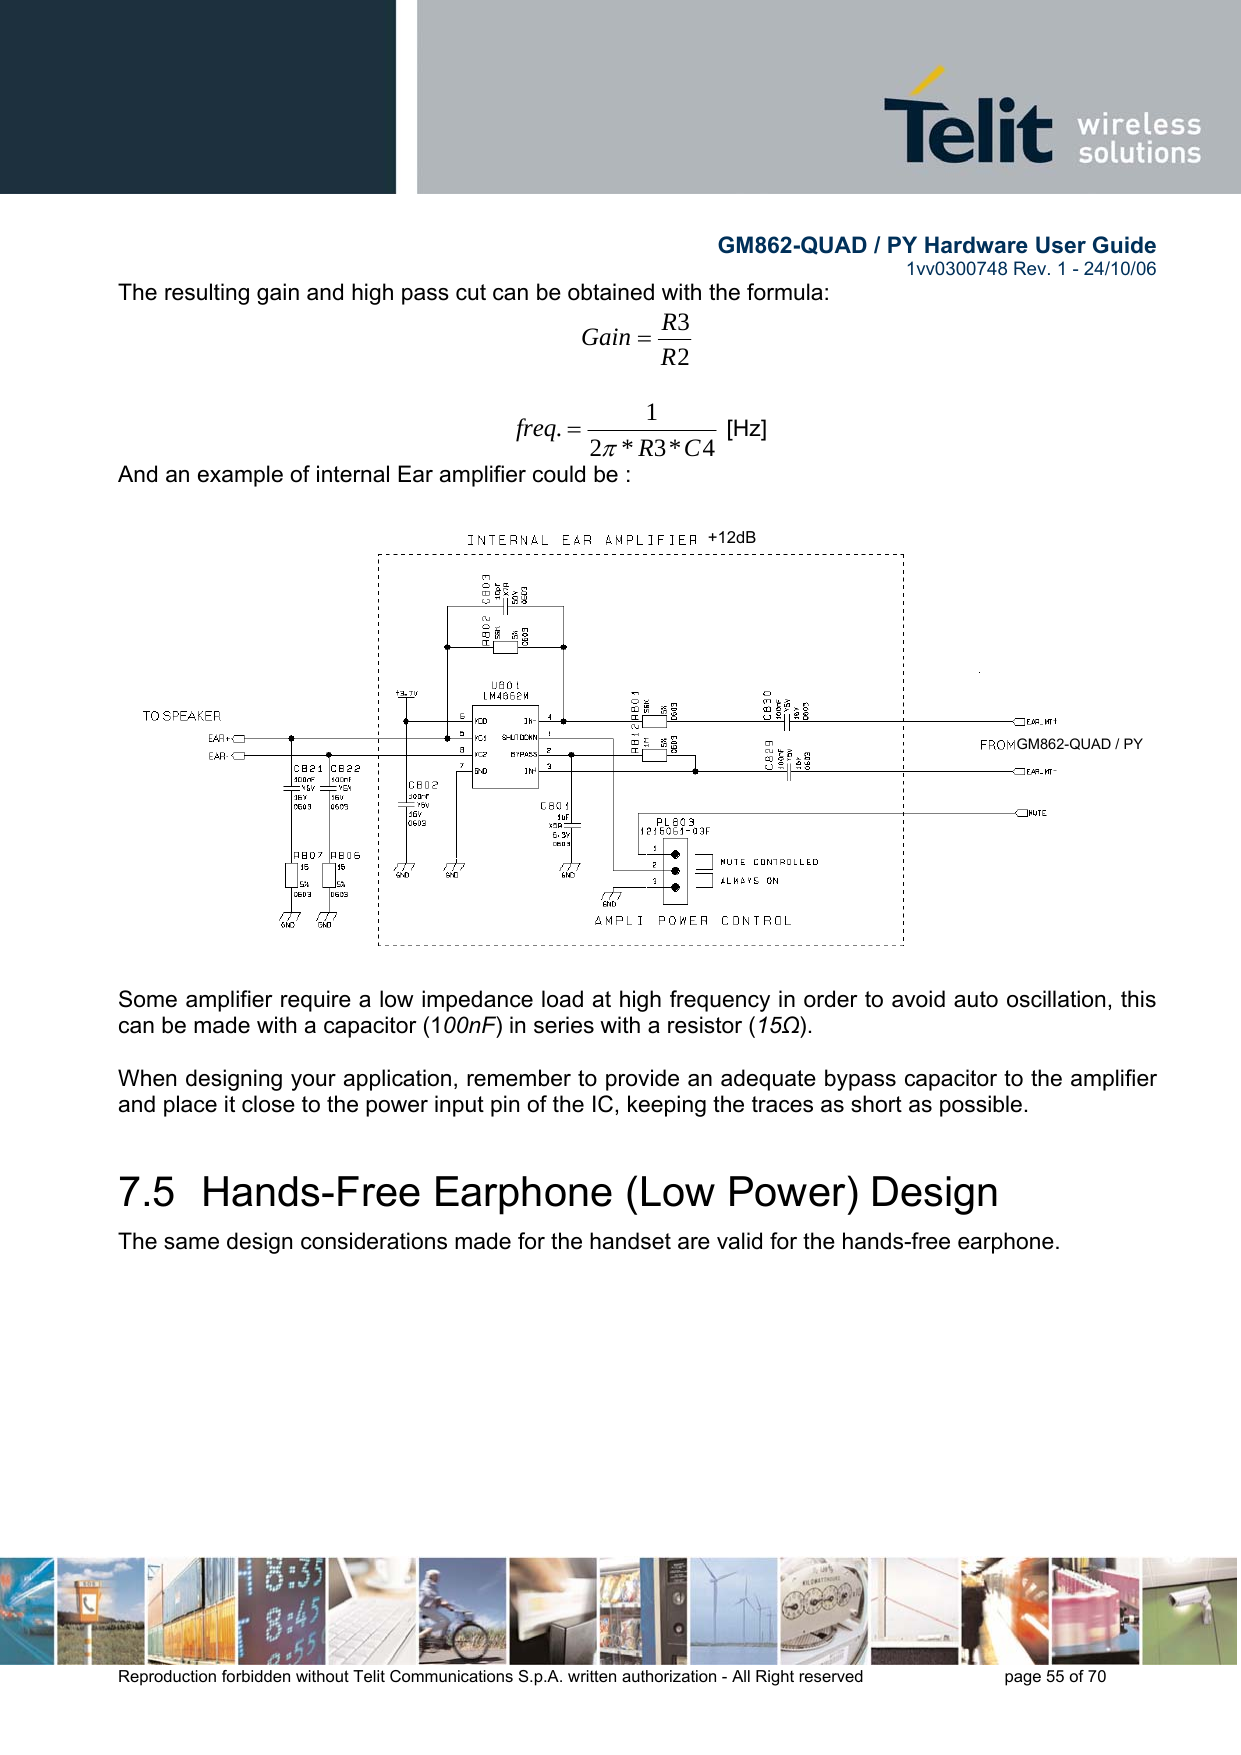        GM862-QUAD / PY Hardware User Guide   1vv0300748 Rev. 1 - 24/10/06    Reproduction forbidden without Telit Communications S.p.A. written authorization - All Right reserved    page 55 of 70  The resulting gain and high pass cut can be obtained with the formula: 23RRGain =  4*3*21.CRfreqπ= [Hz] And an example of internal Ear amplifier could be :  Some amplifier require a low impedance load at high frequency in order to avoid auto oscillation, this can be made with a capacitor (100nF) in series with a resistor (15Ω).  When designing your application, remember to provide an adequate bypass capacitor to the amplifier and place it close to the power input pin of the IC, keeping the traces as short as possible. 7.5  Hands-Free Earphone (Low Power) Design The same design considerations made for the handset are valid for the hands-free earphone. +12dBGM862-QUAD / PY